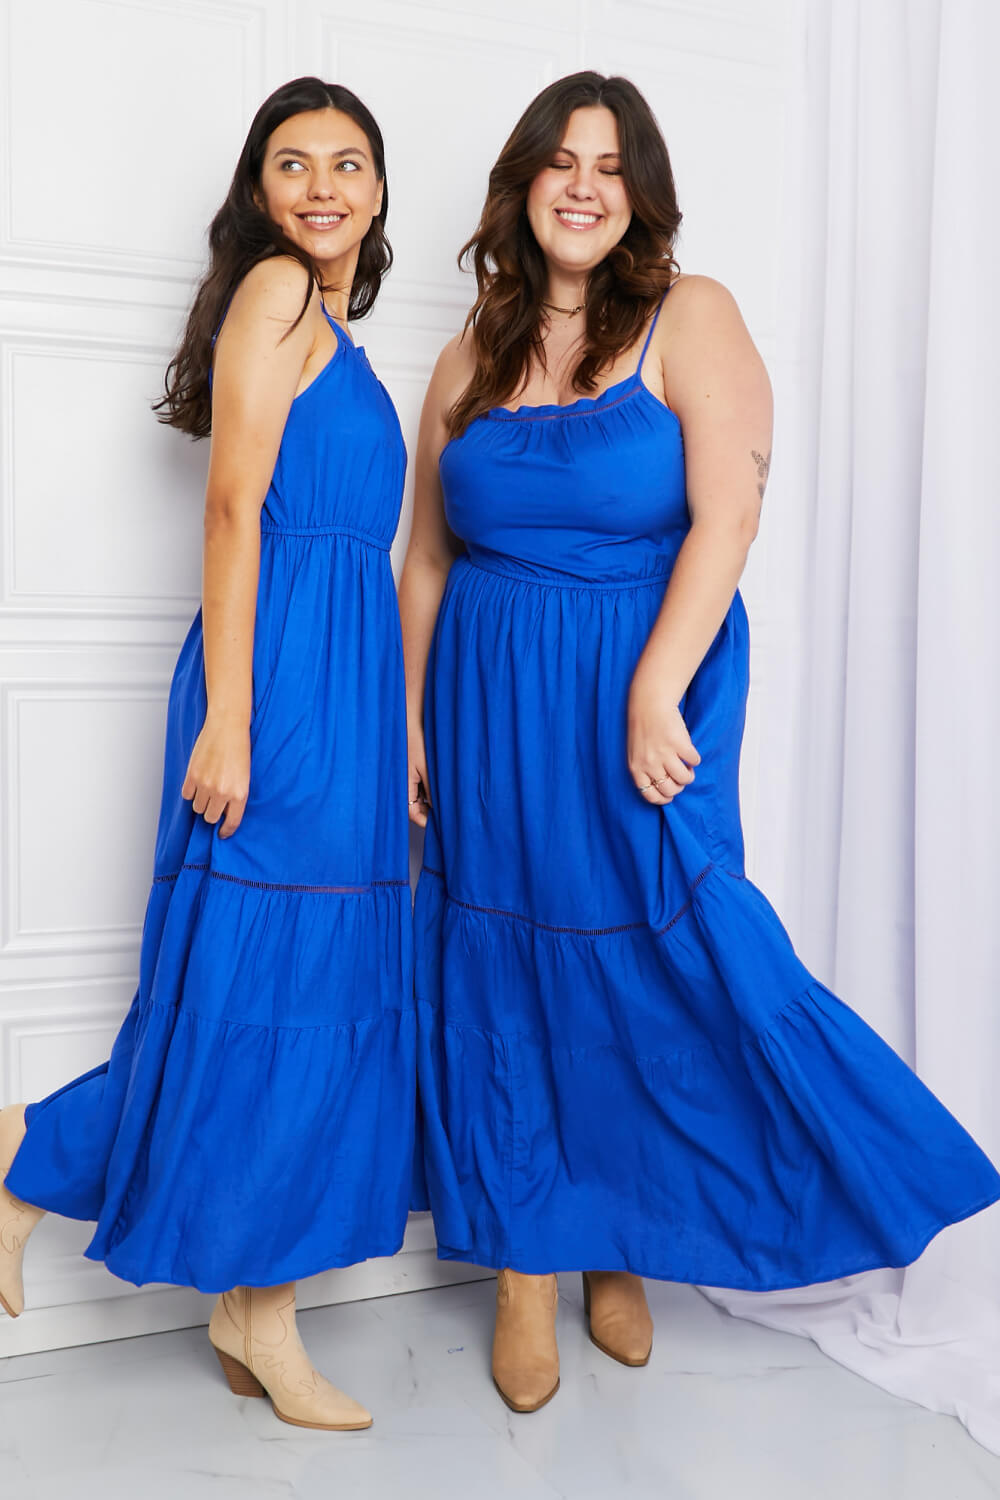 Women's Strappy Tiered Maxi Dress - Royal Blue